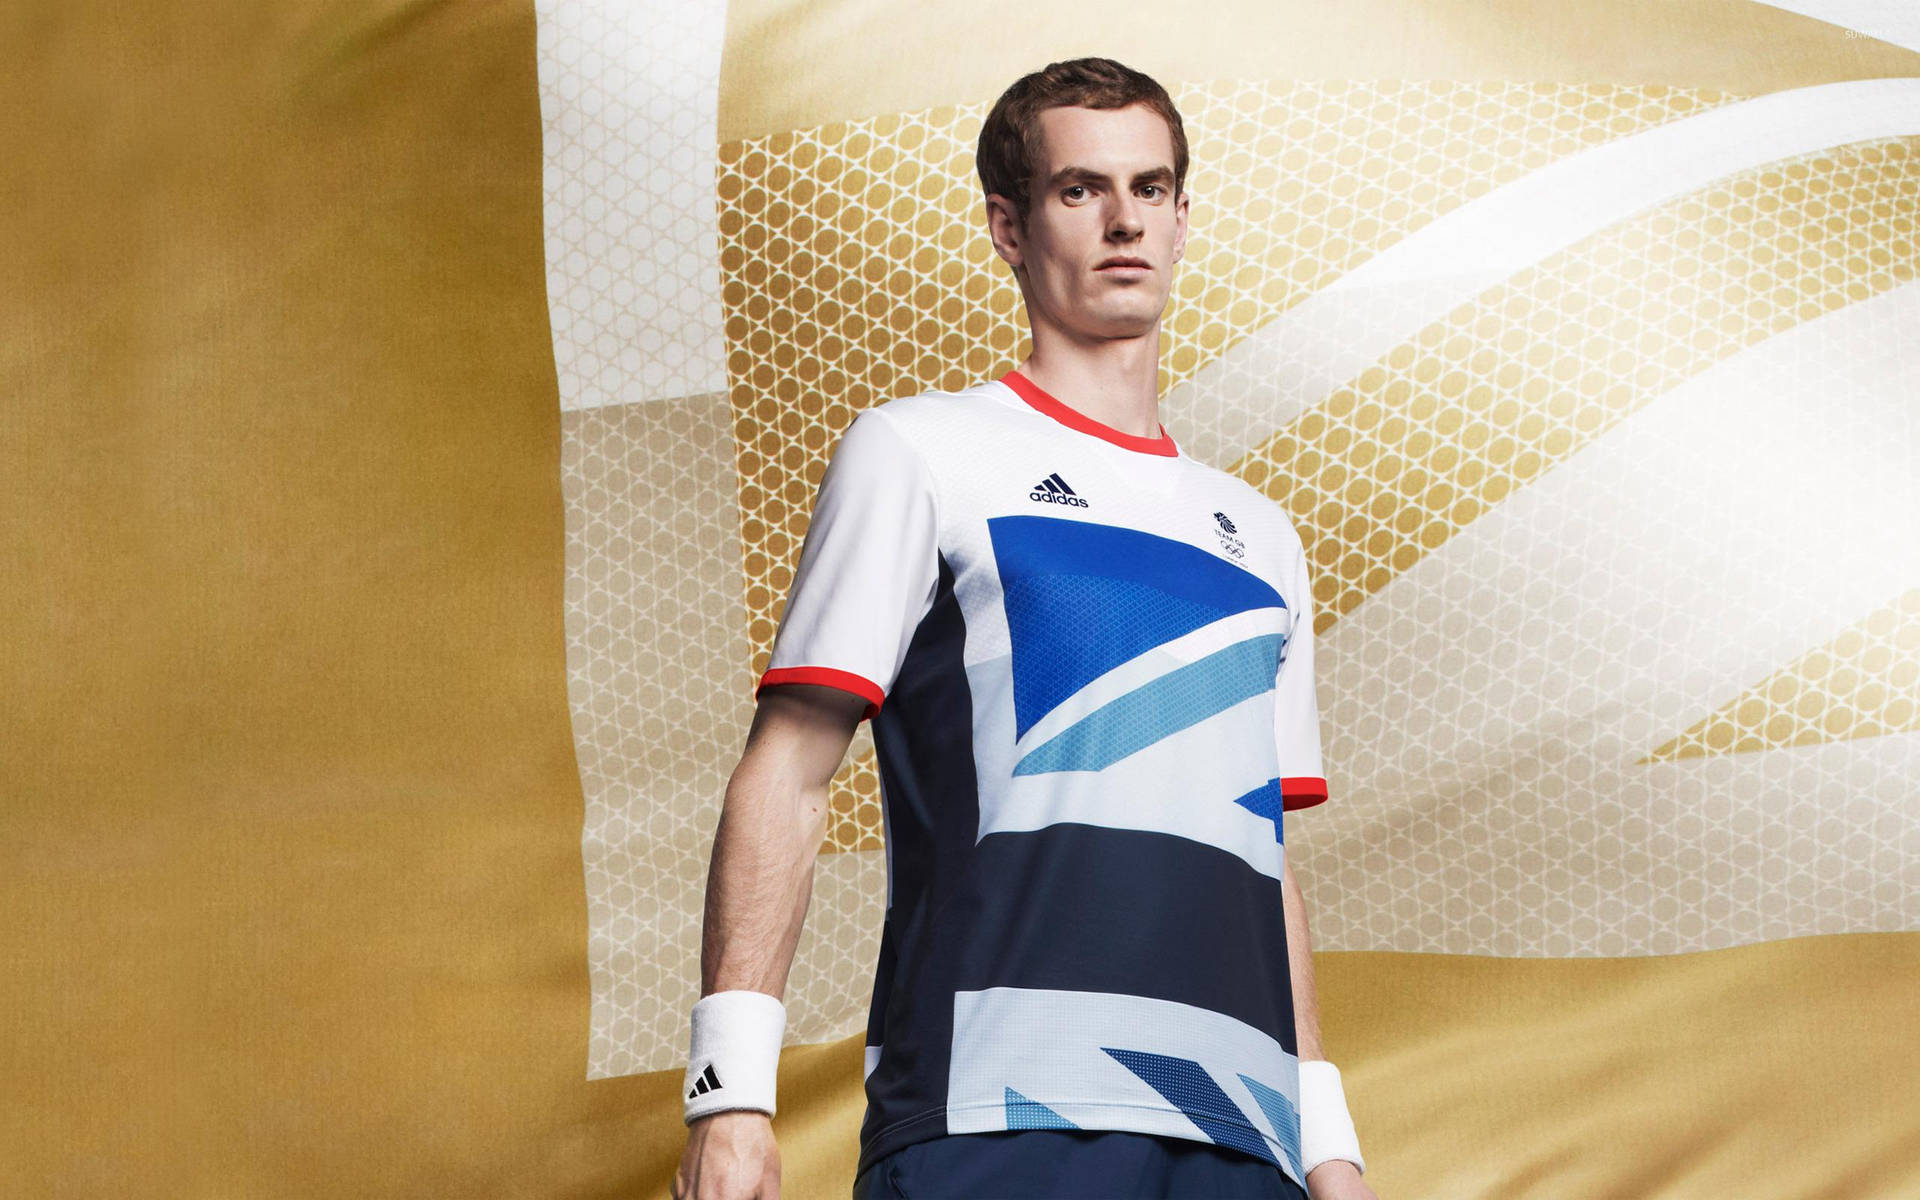 Andy Murray In Adidas Athleisure Outfit